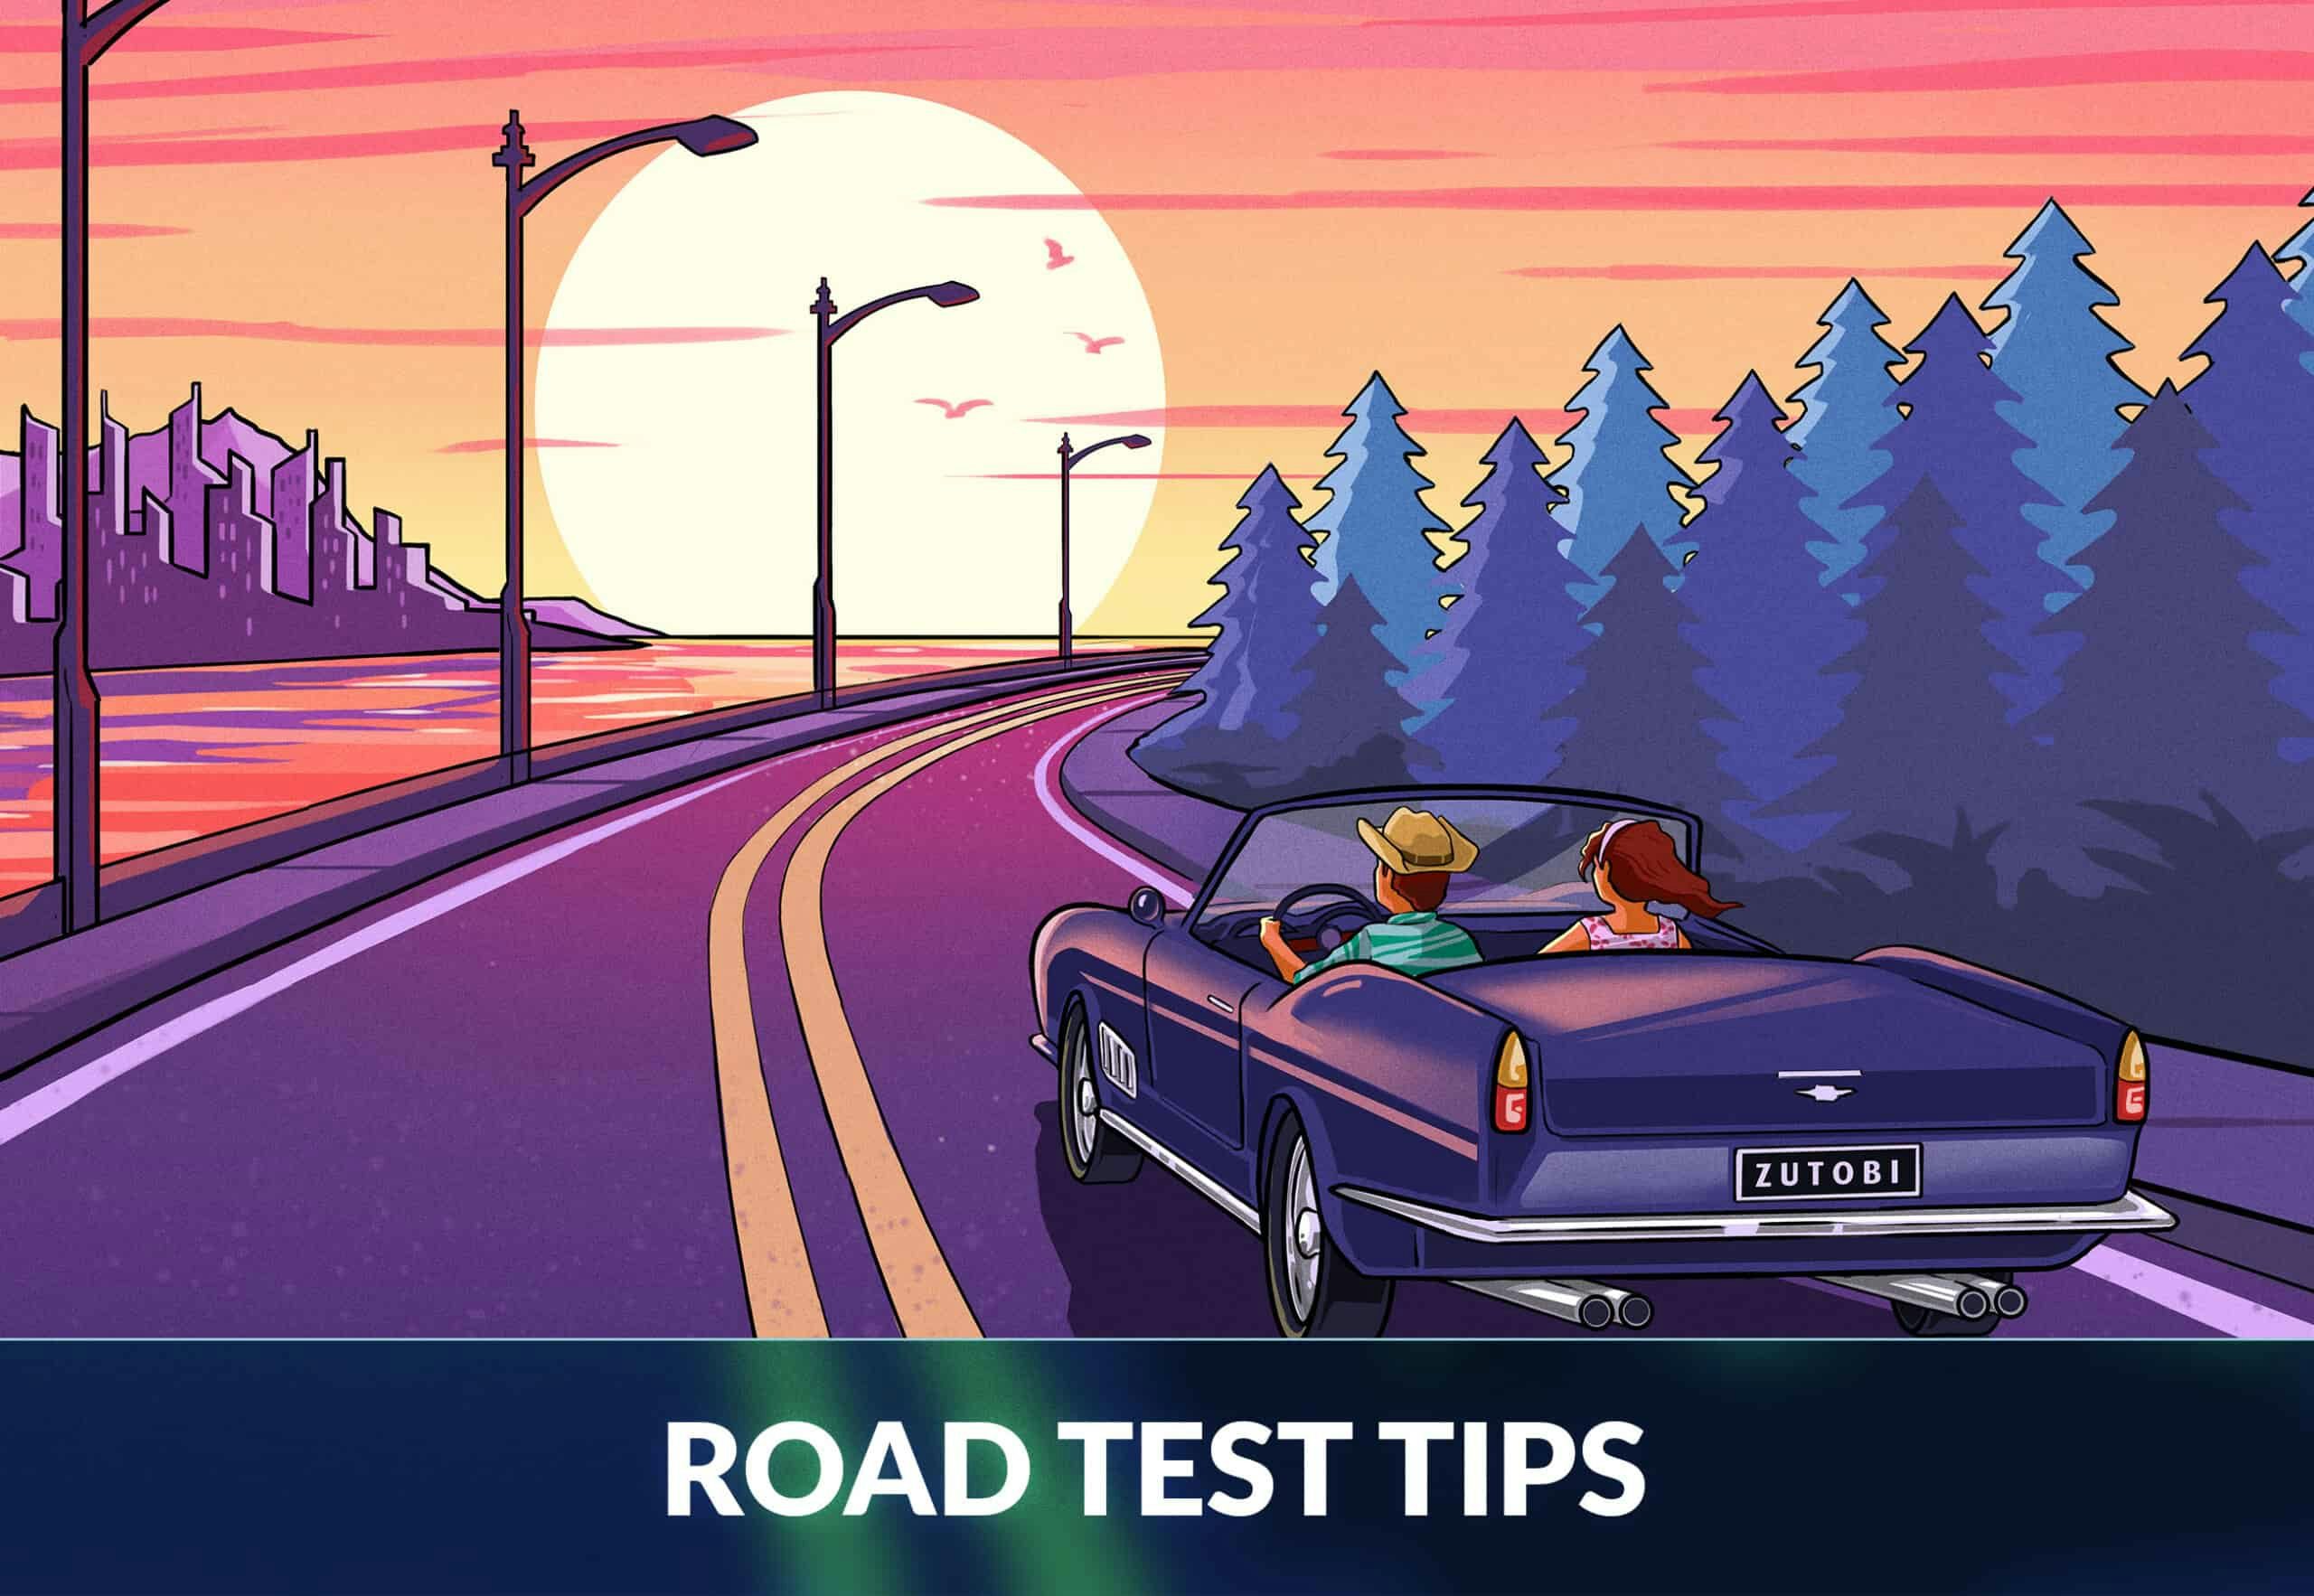 ROAD TEST TIPS